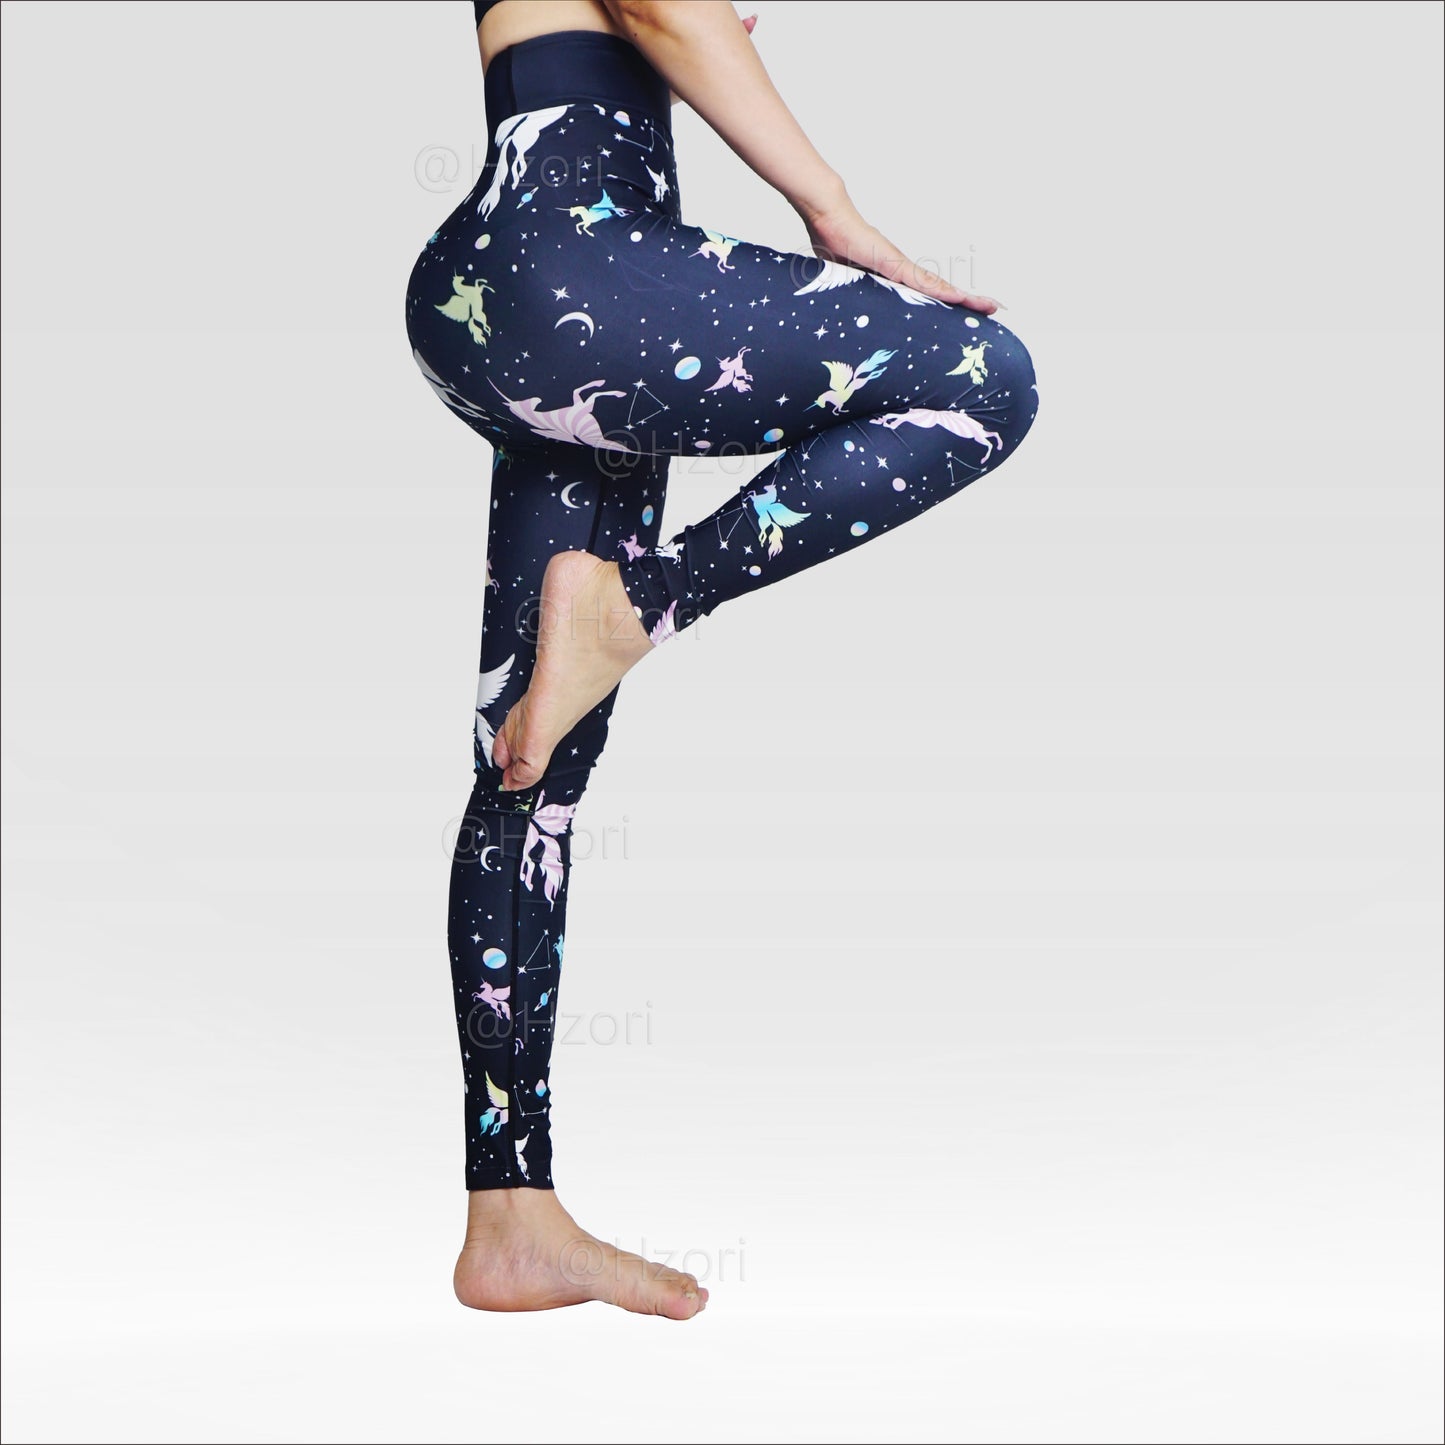 HZORI® |High Waist Printed Yoga Pants for Women, Tummy Control Running Sports Workout Yoga Leggings | Constellation Element Style